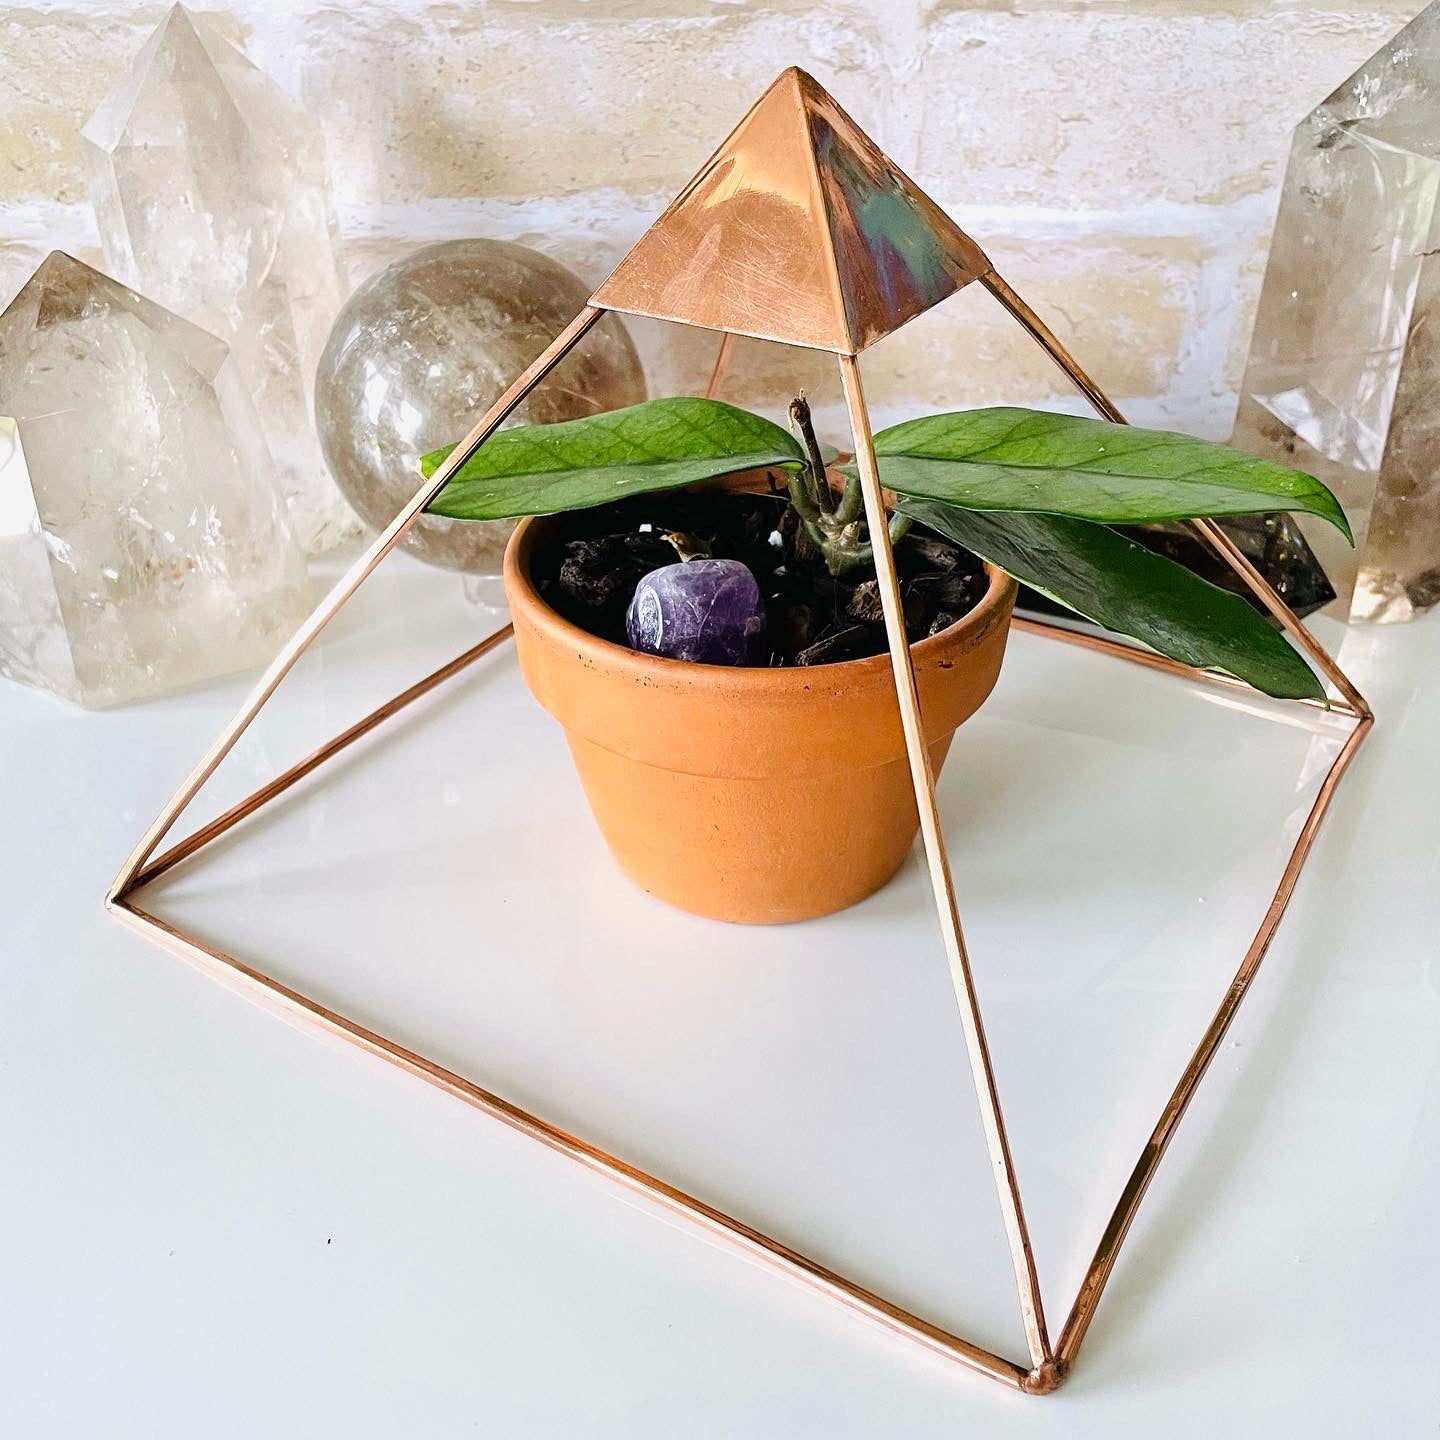 Copper Pyramid for Conducting Energy Flow